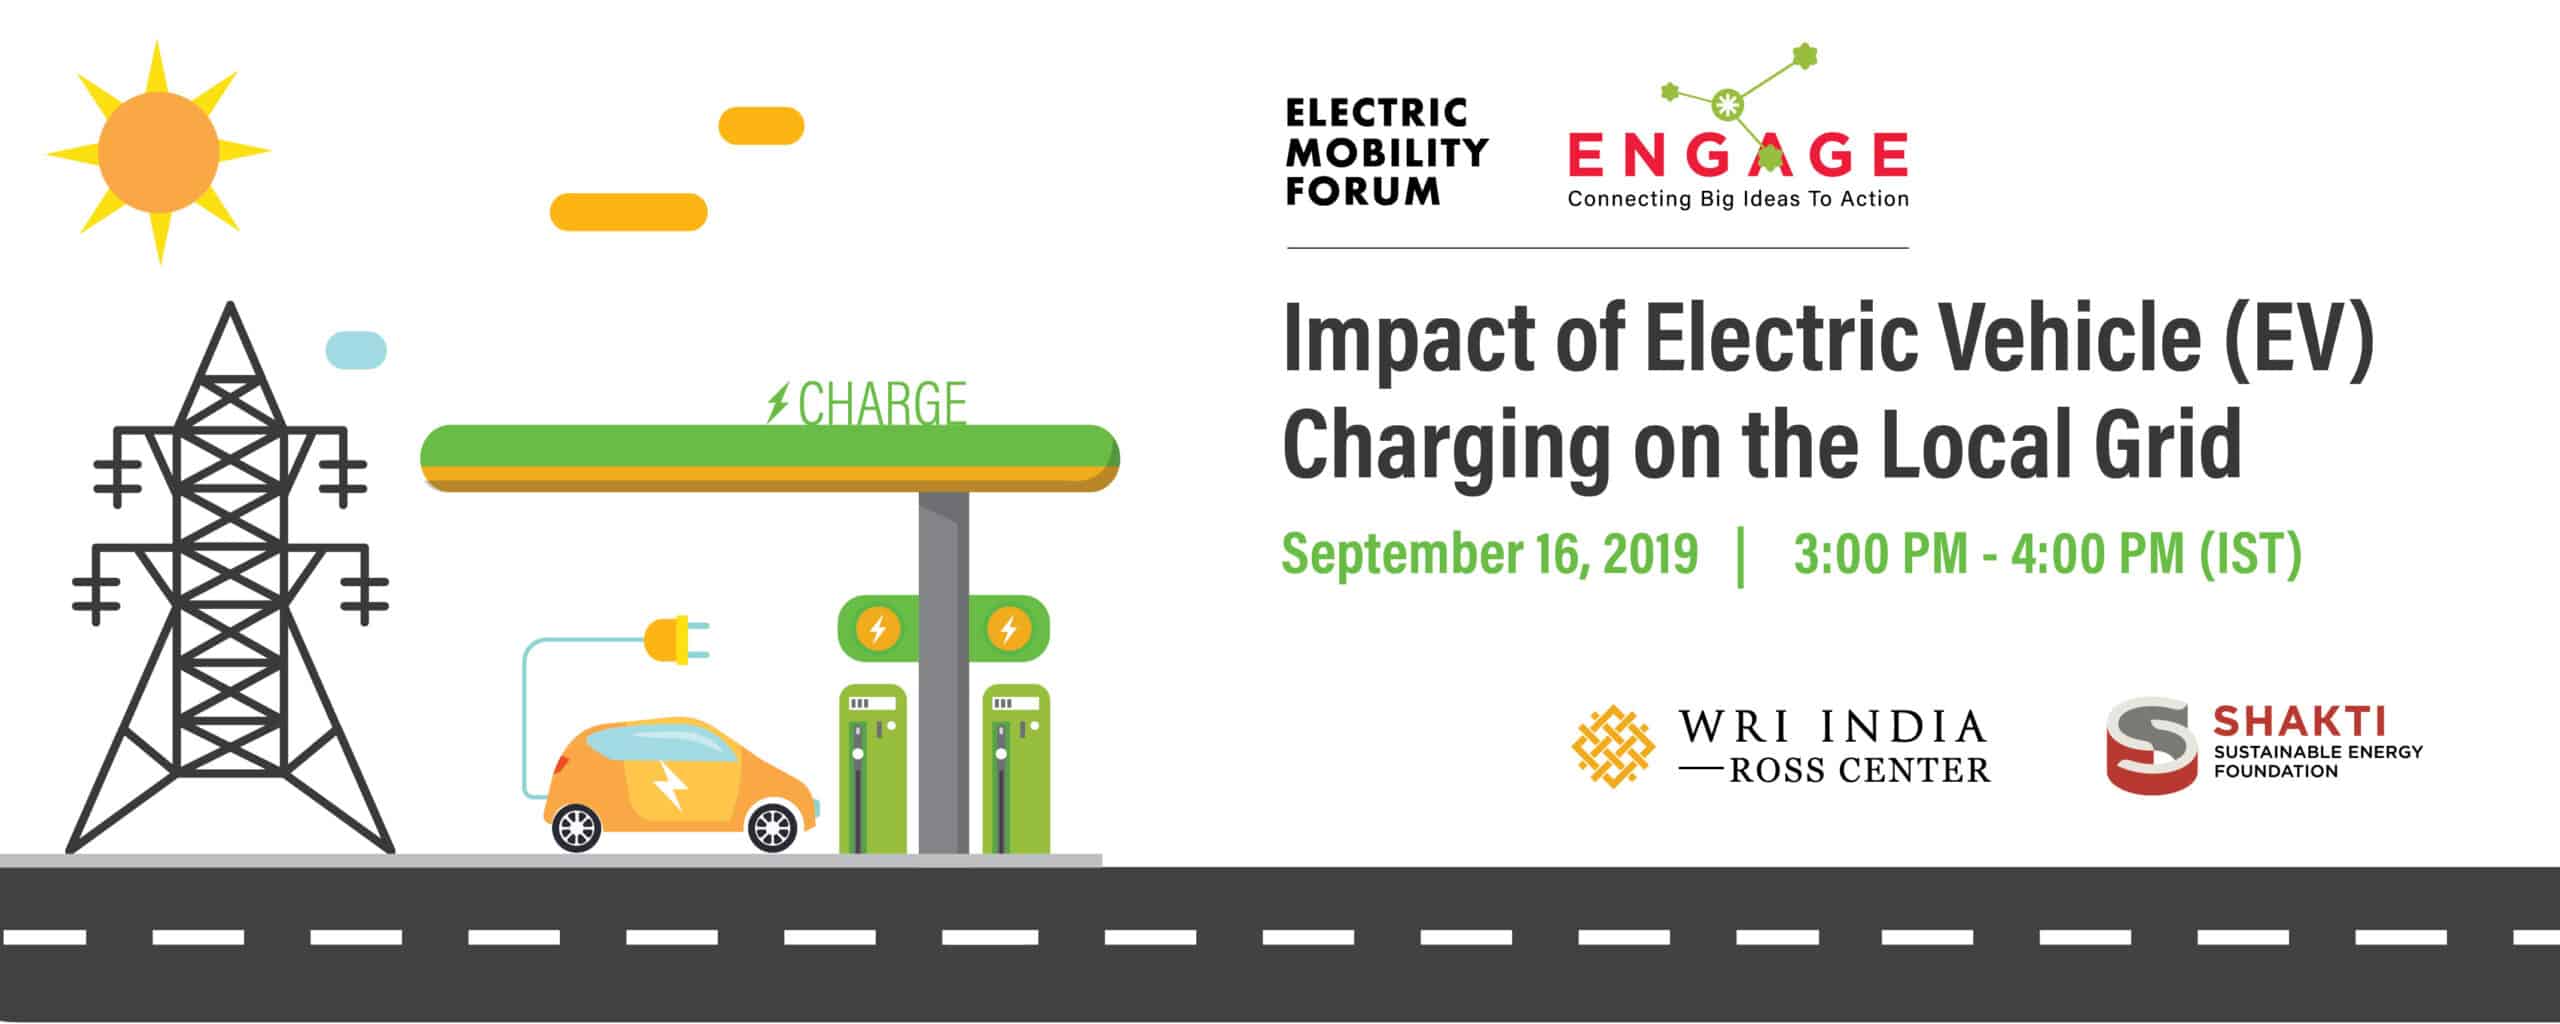 Impact of Electric Vehicle (EV) Charging on the Local Grid